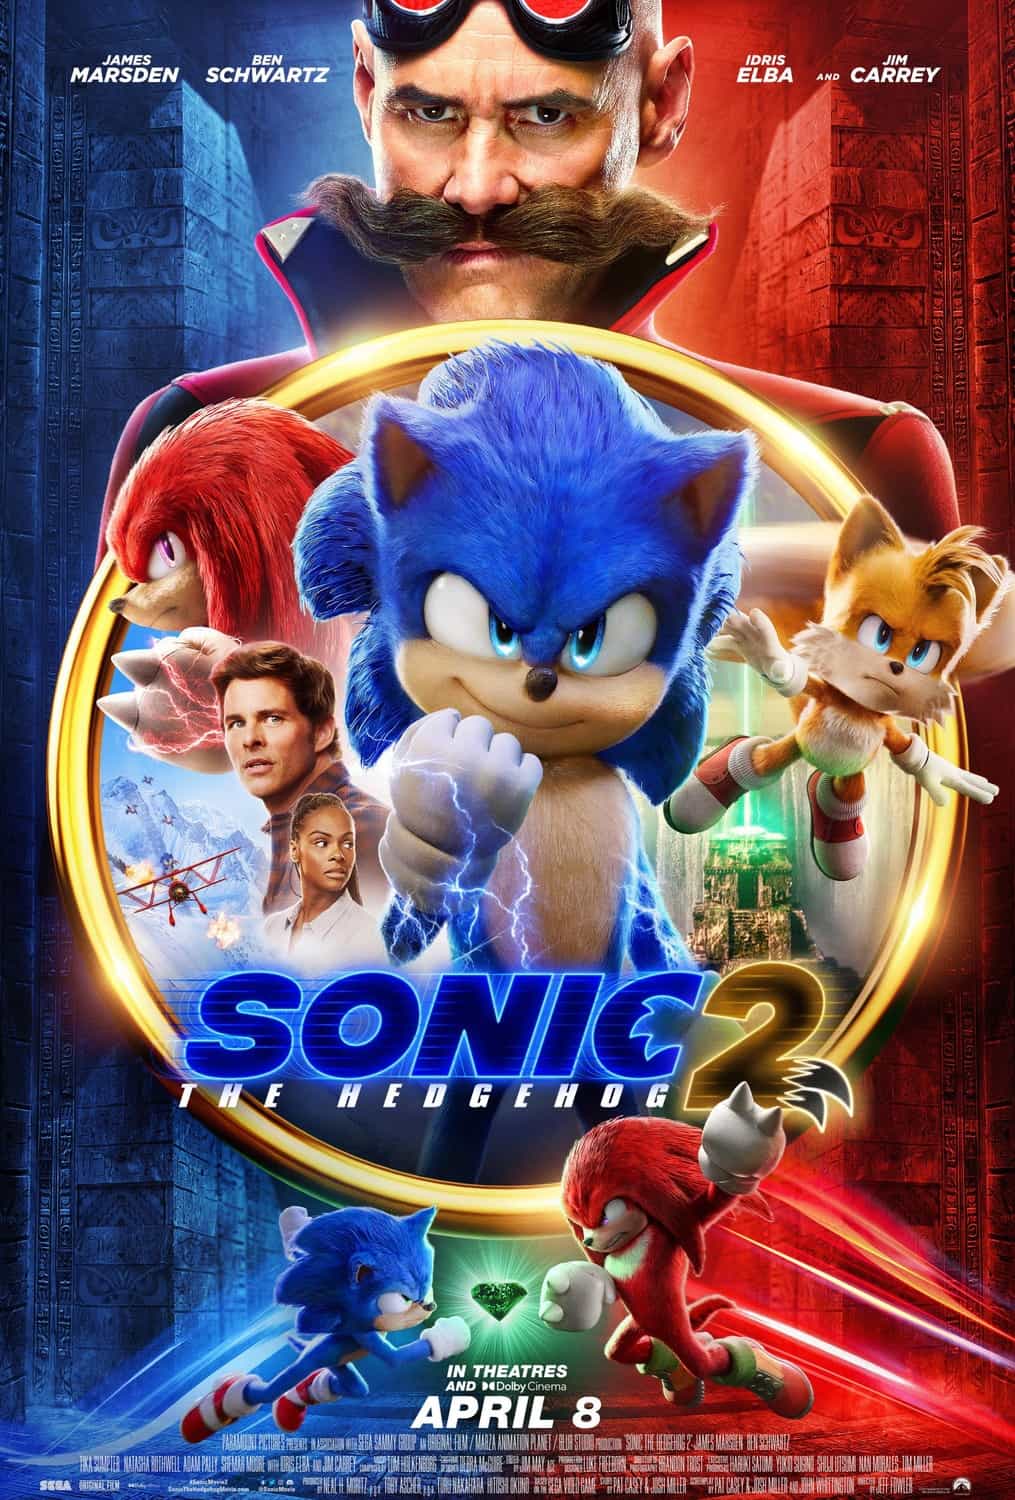 World Box Office Weekend Report 8th - 10th April 2022: Sonic the Hedgehog 2 takes over at the top of the global box office with $108 Million weekend gross